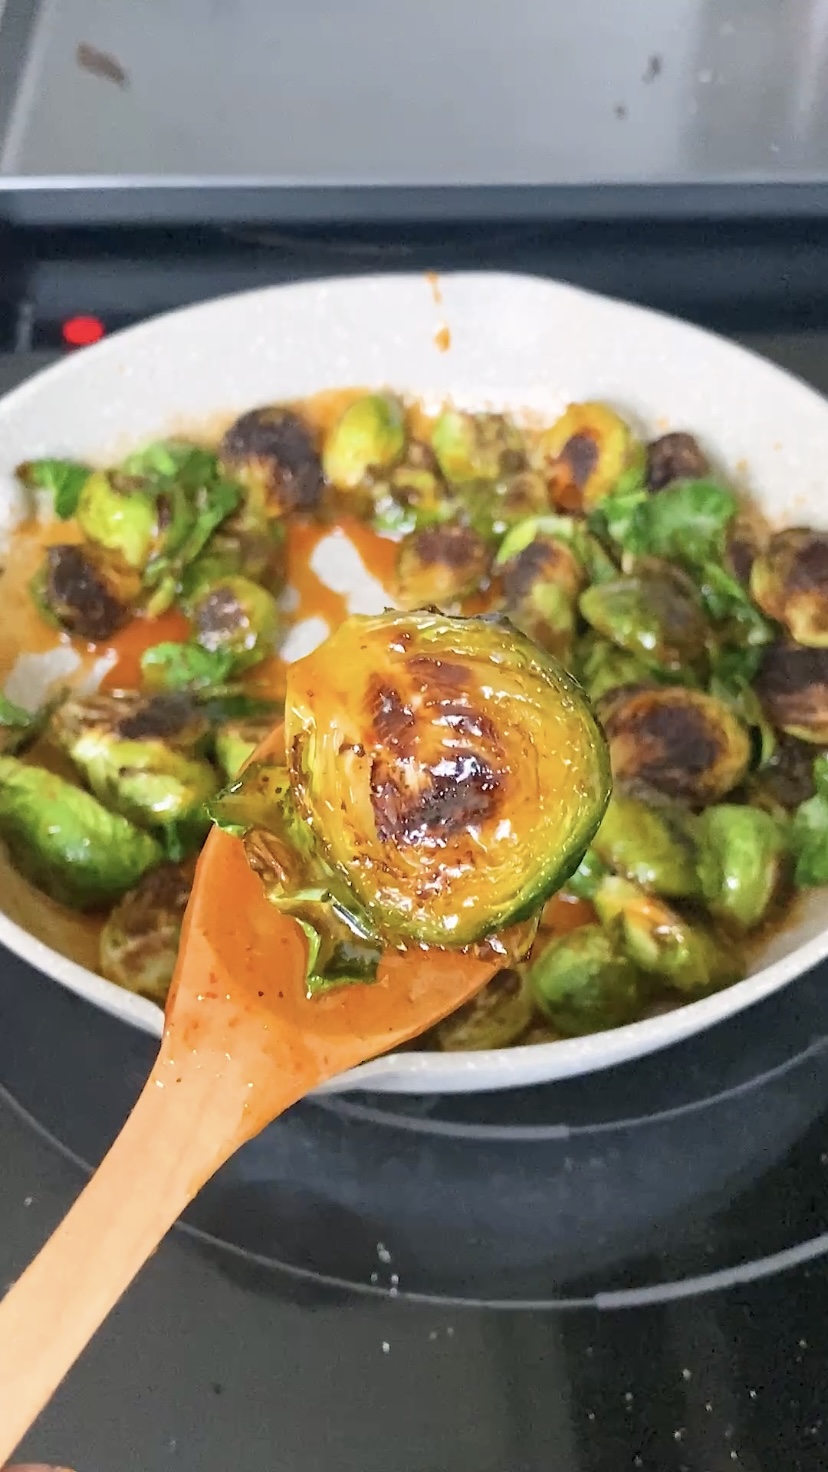 A close-up of a roasted Brussels sprout coated in honey sriracha sauce.